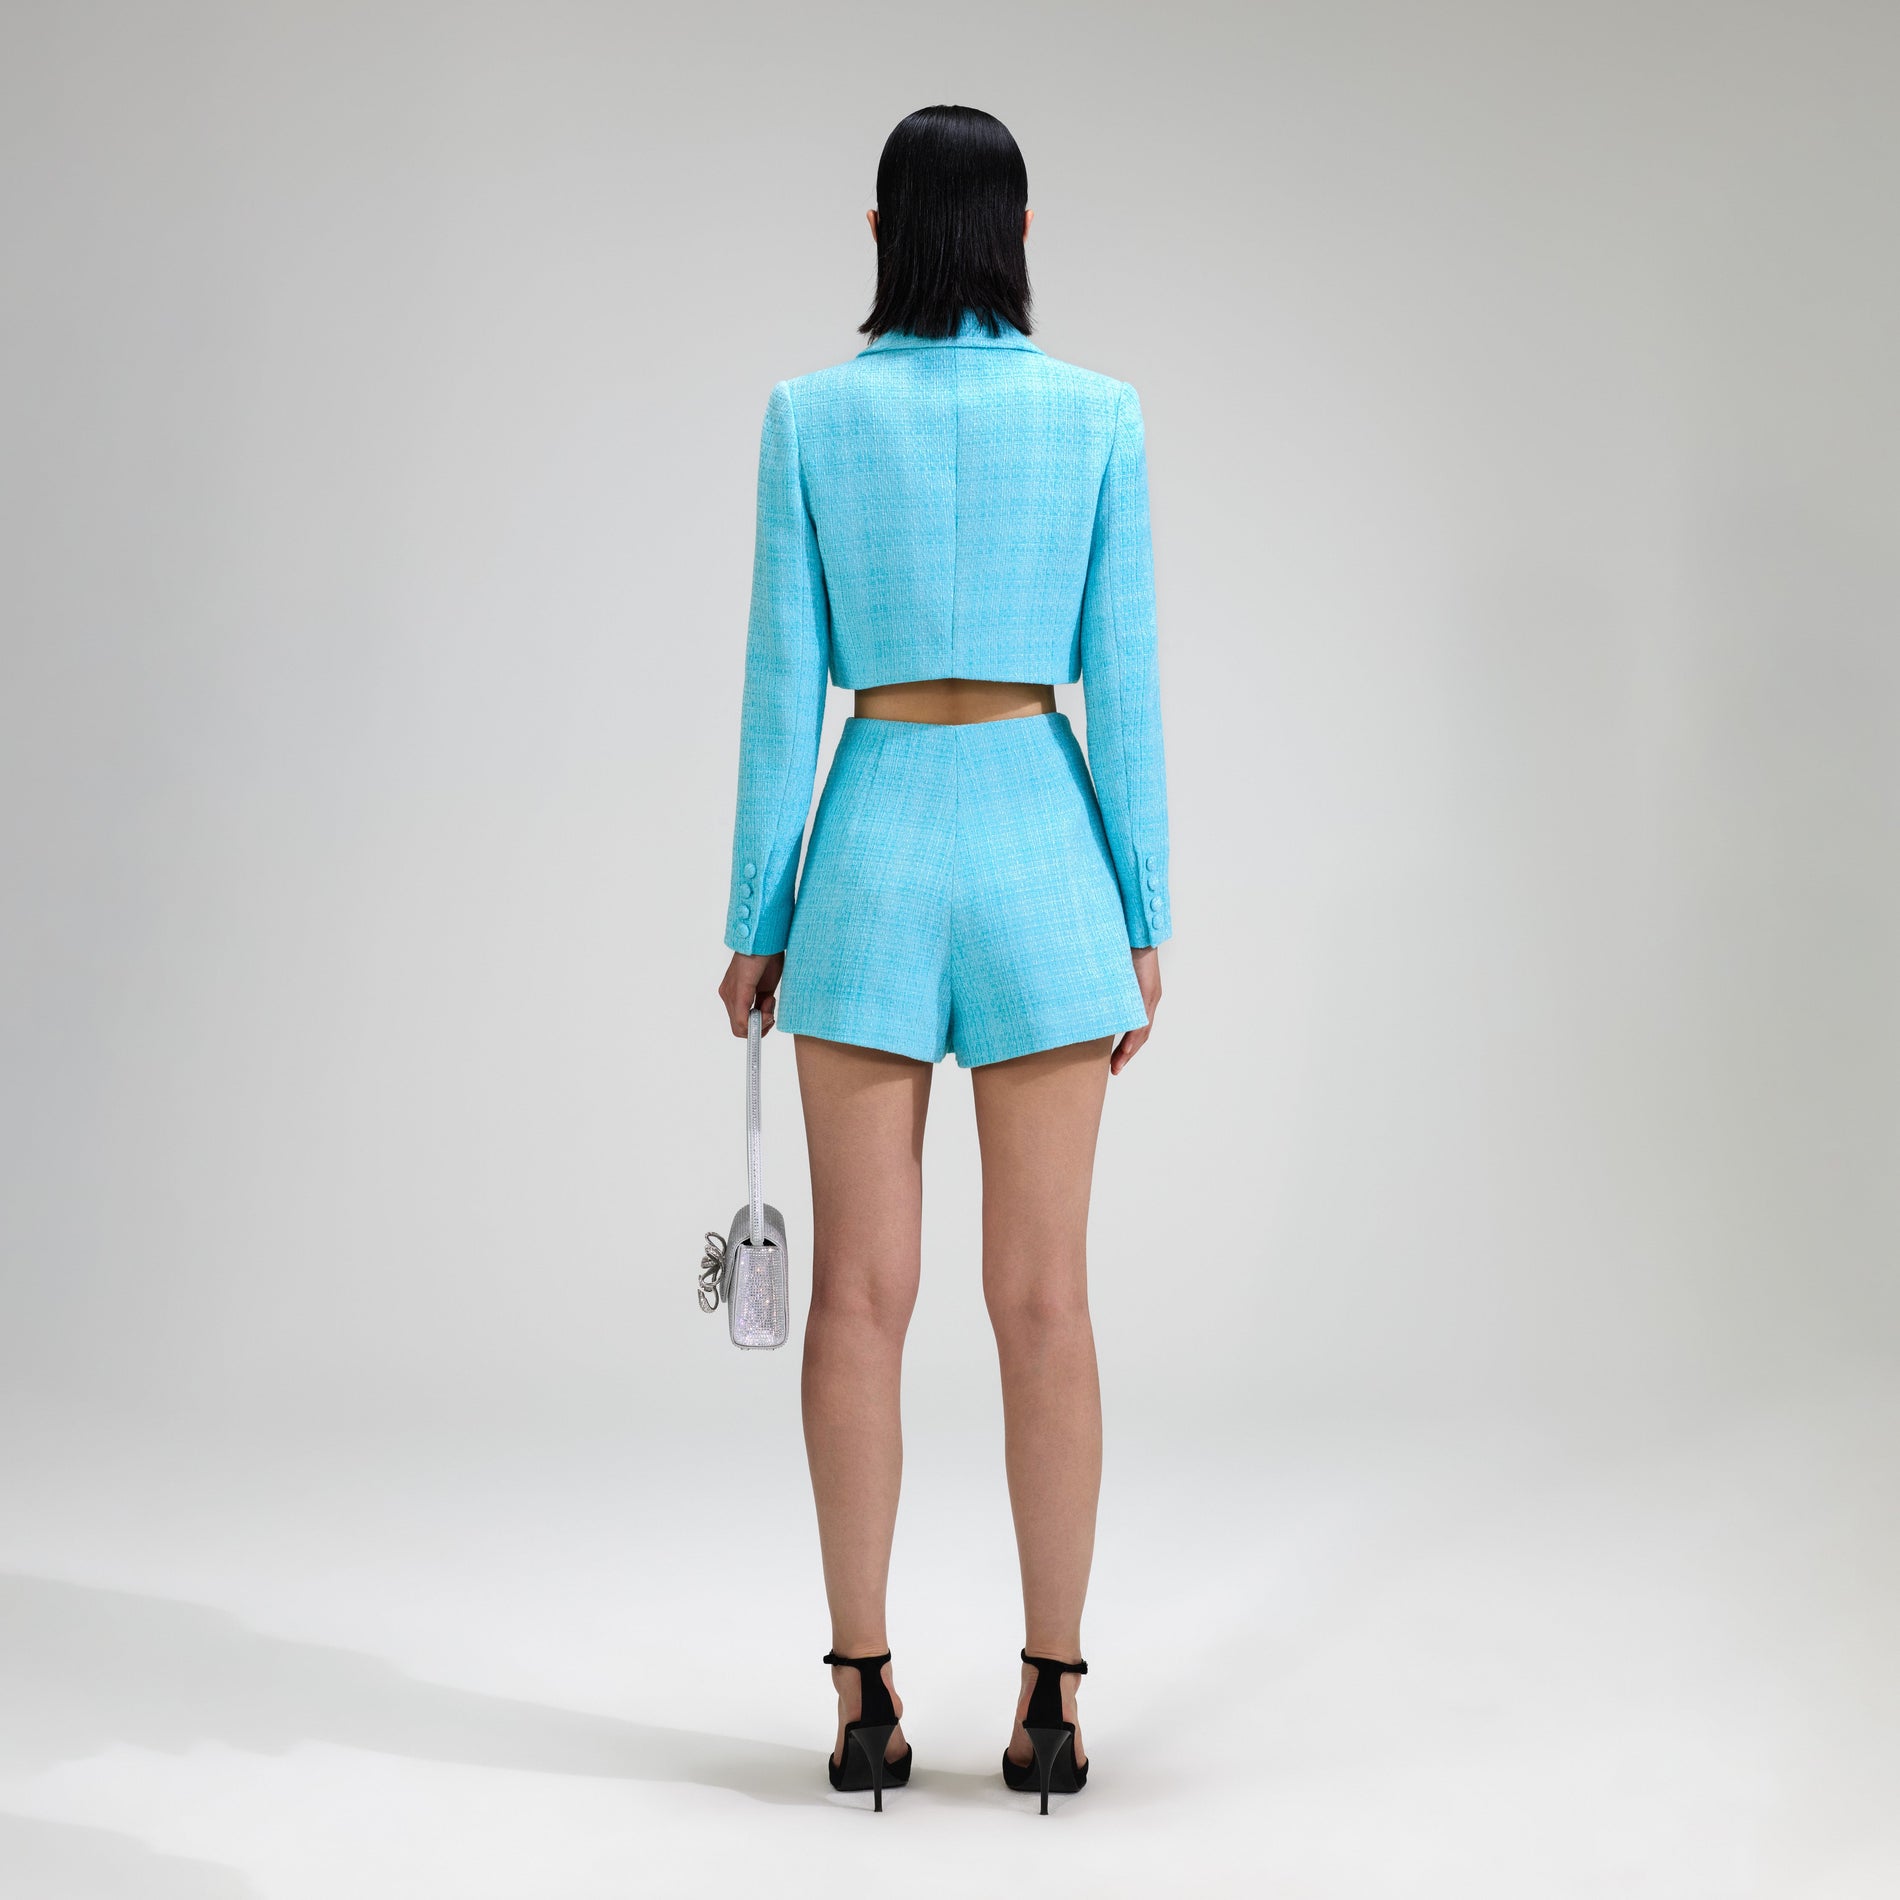 A woman wearing the Blue Boucle Skort